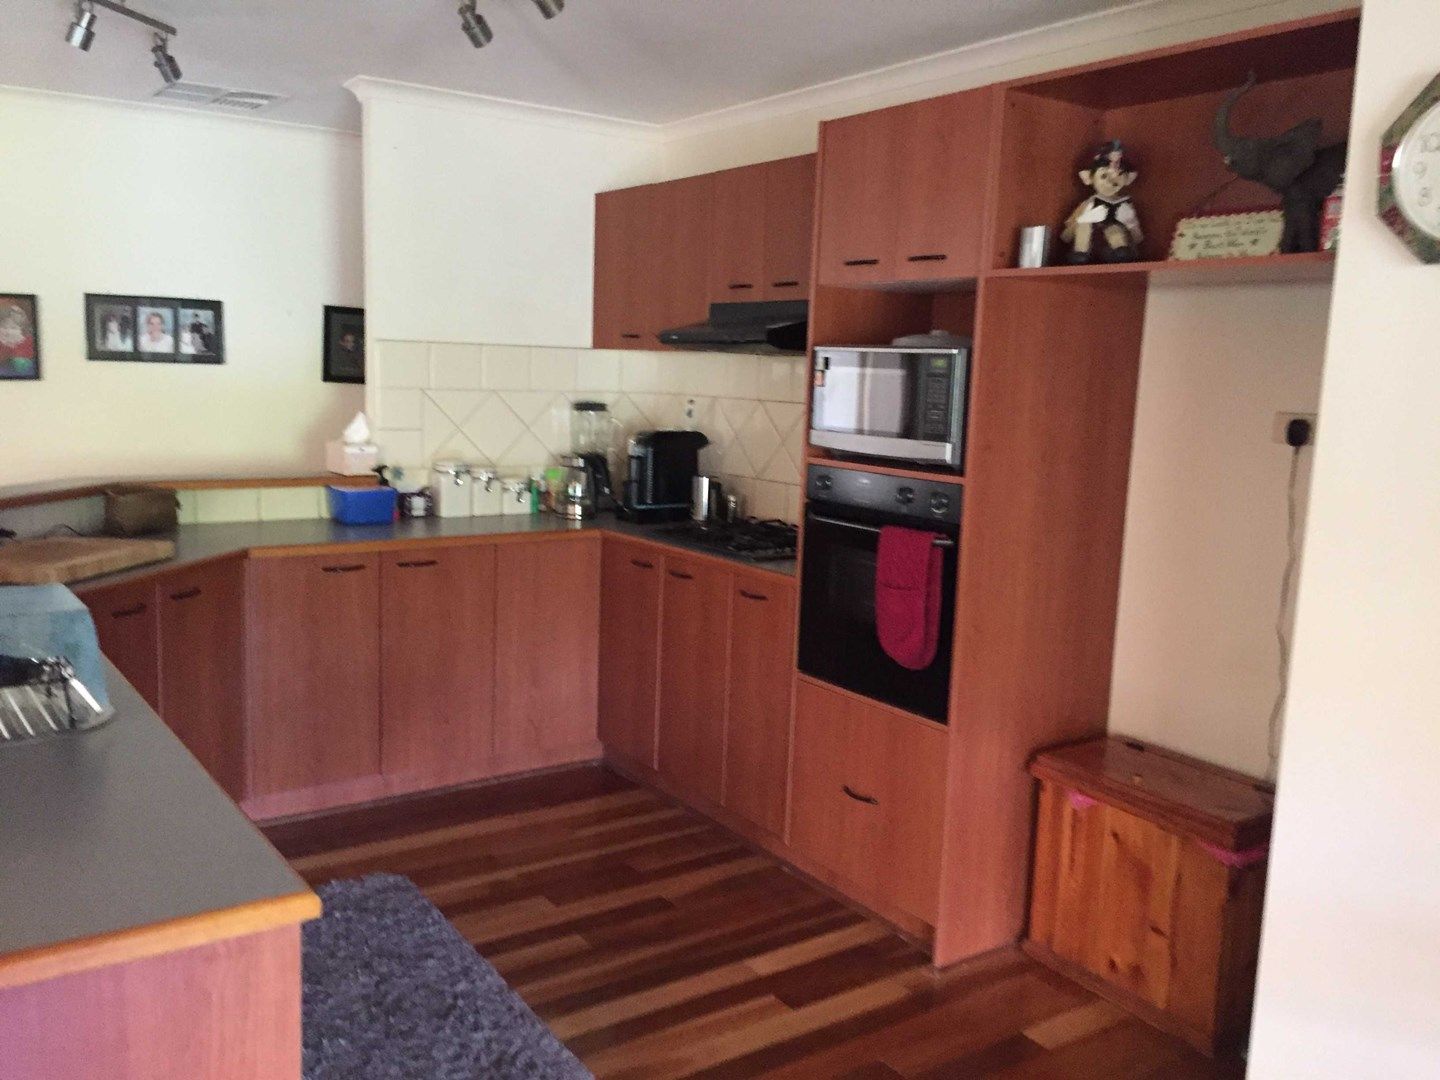 1690 Diggers Rest-Coimaidai Rd,, Toolern Vale VIC 3337, Image 1